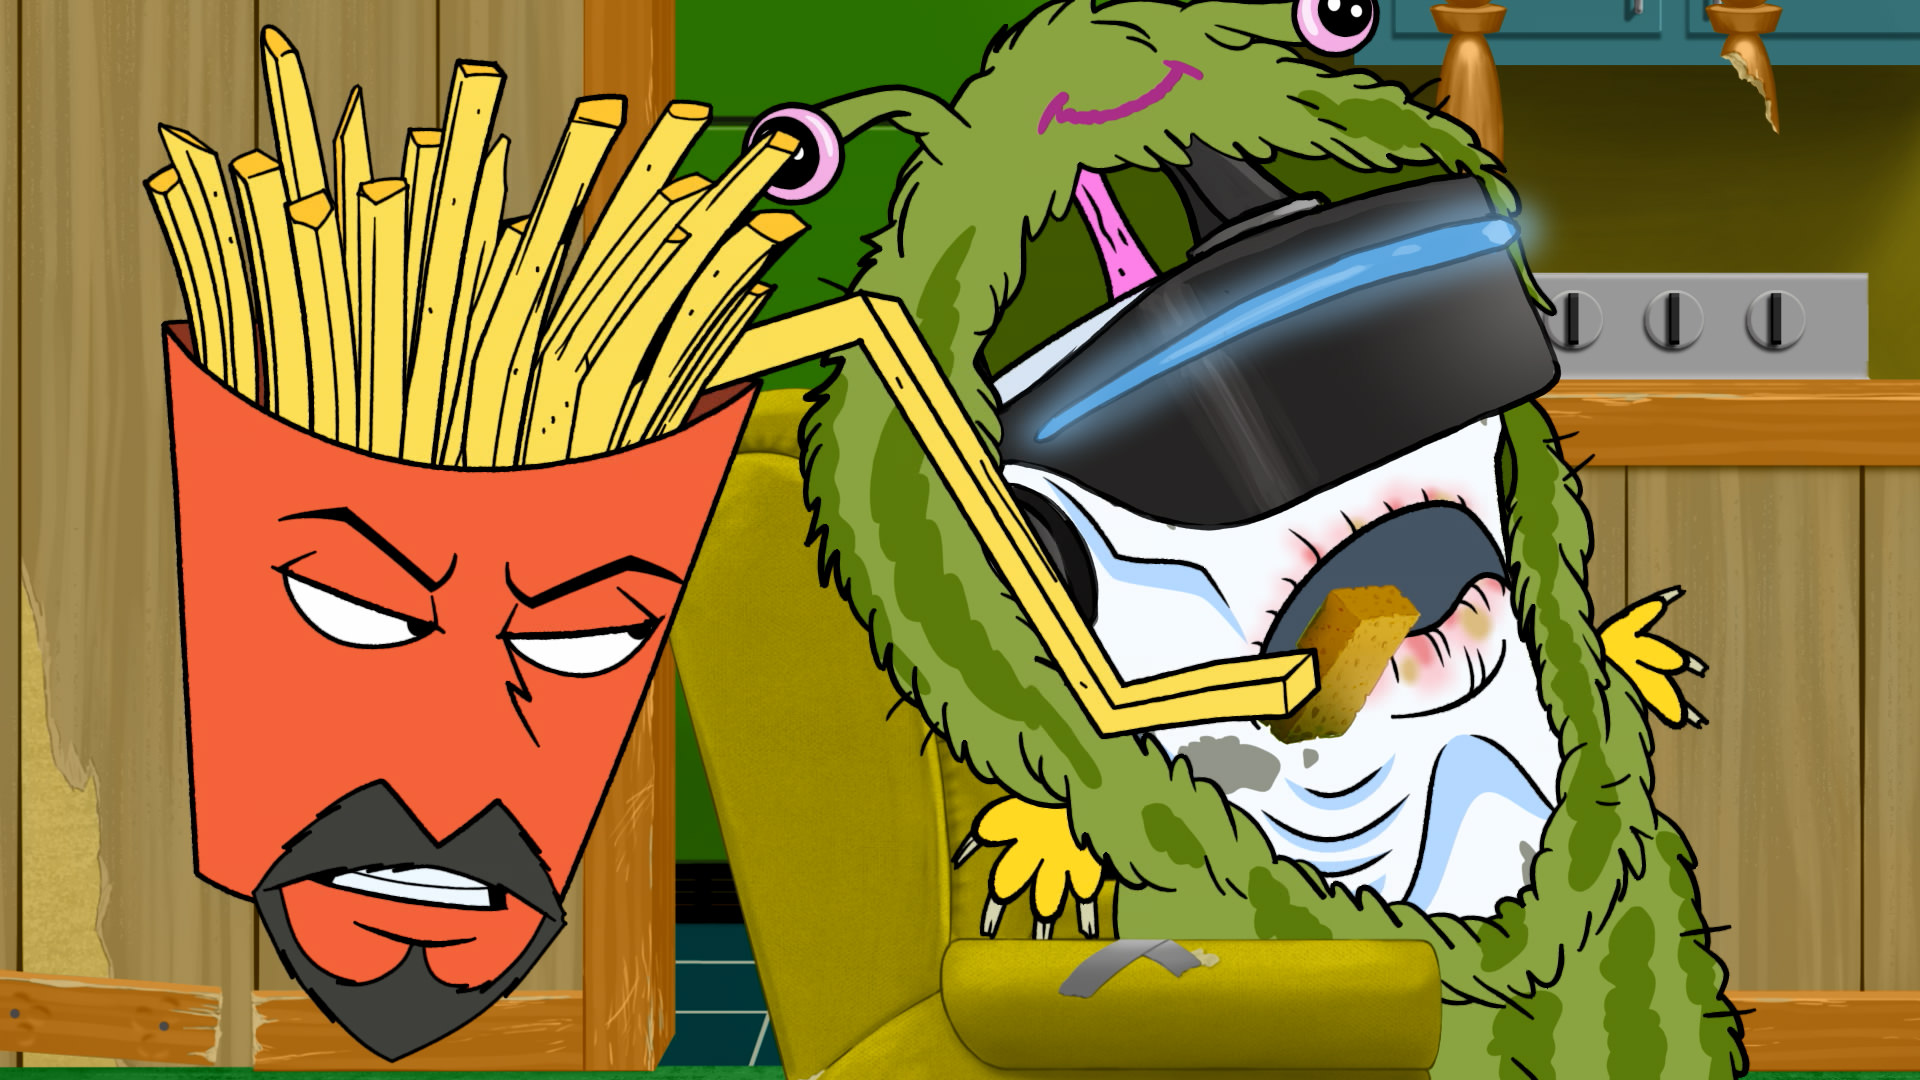 Frylock and Master Shake in Aqua Teen Hunger Force Season 12. Art provided by Warner Bros. Discovery